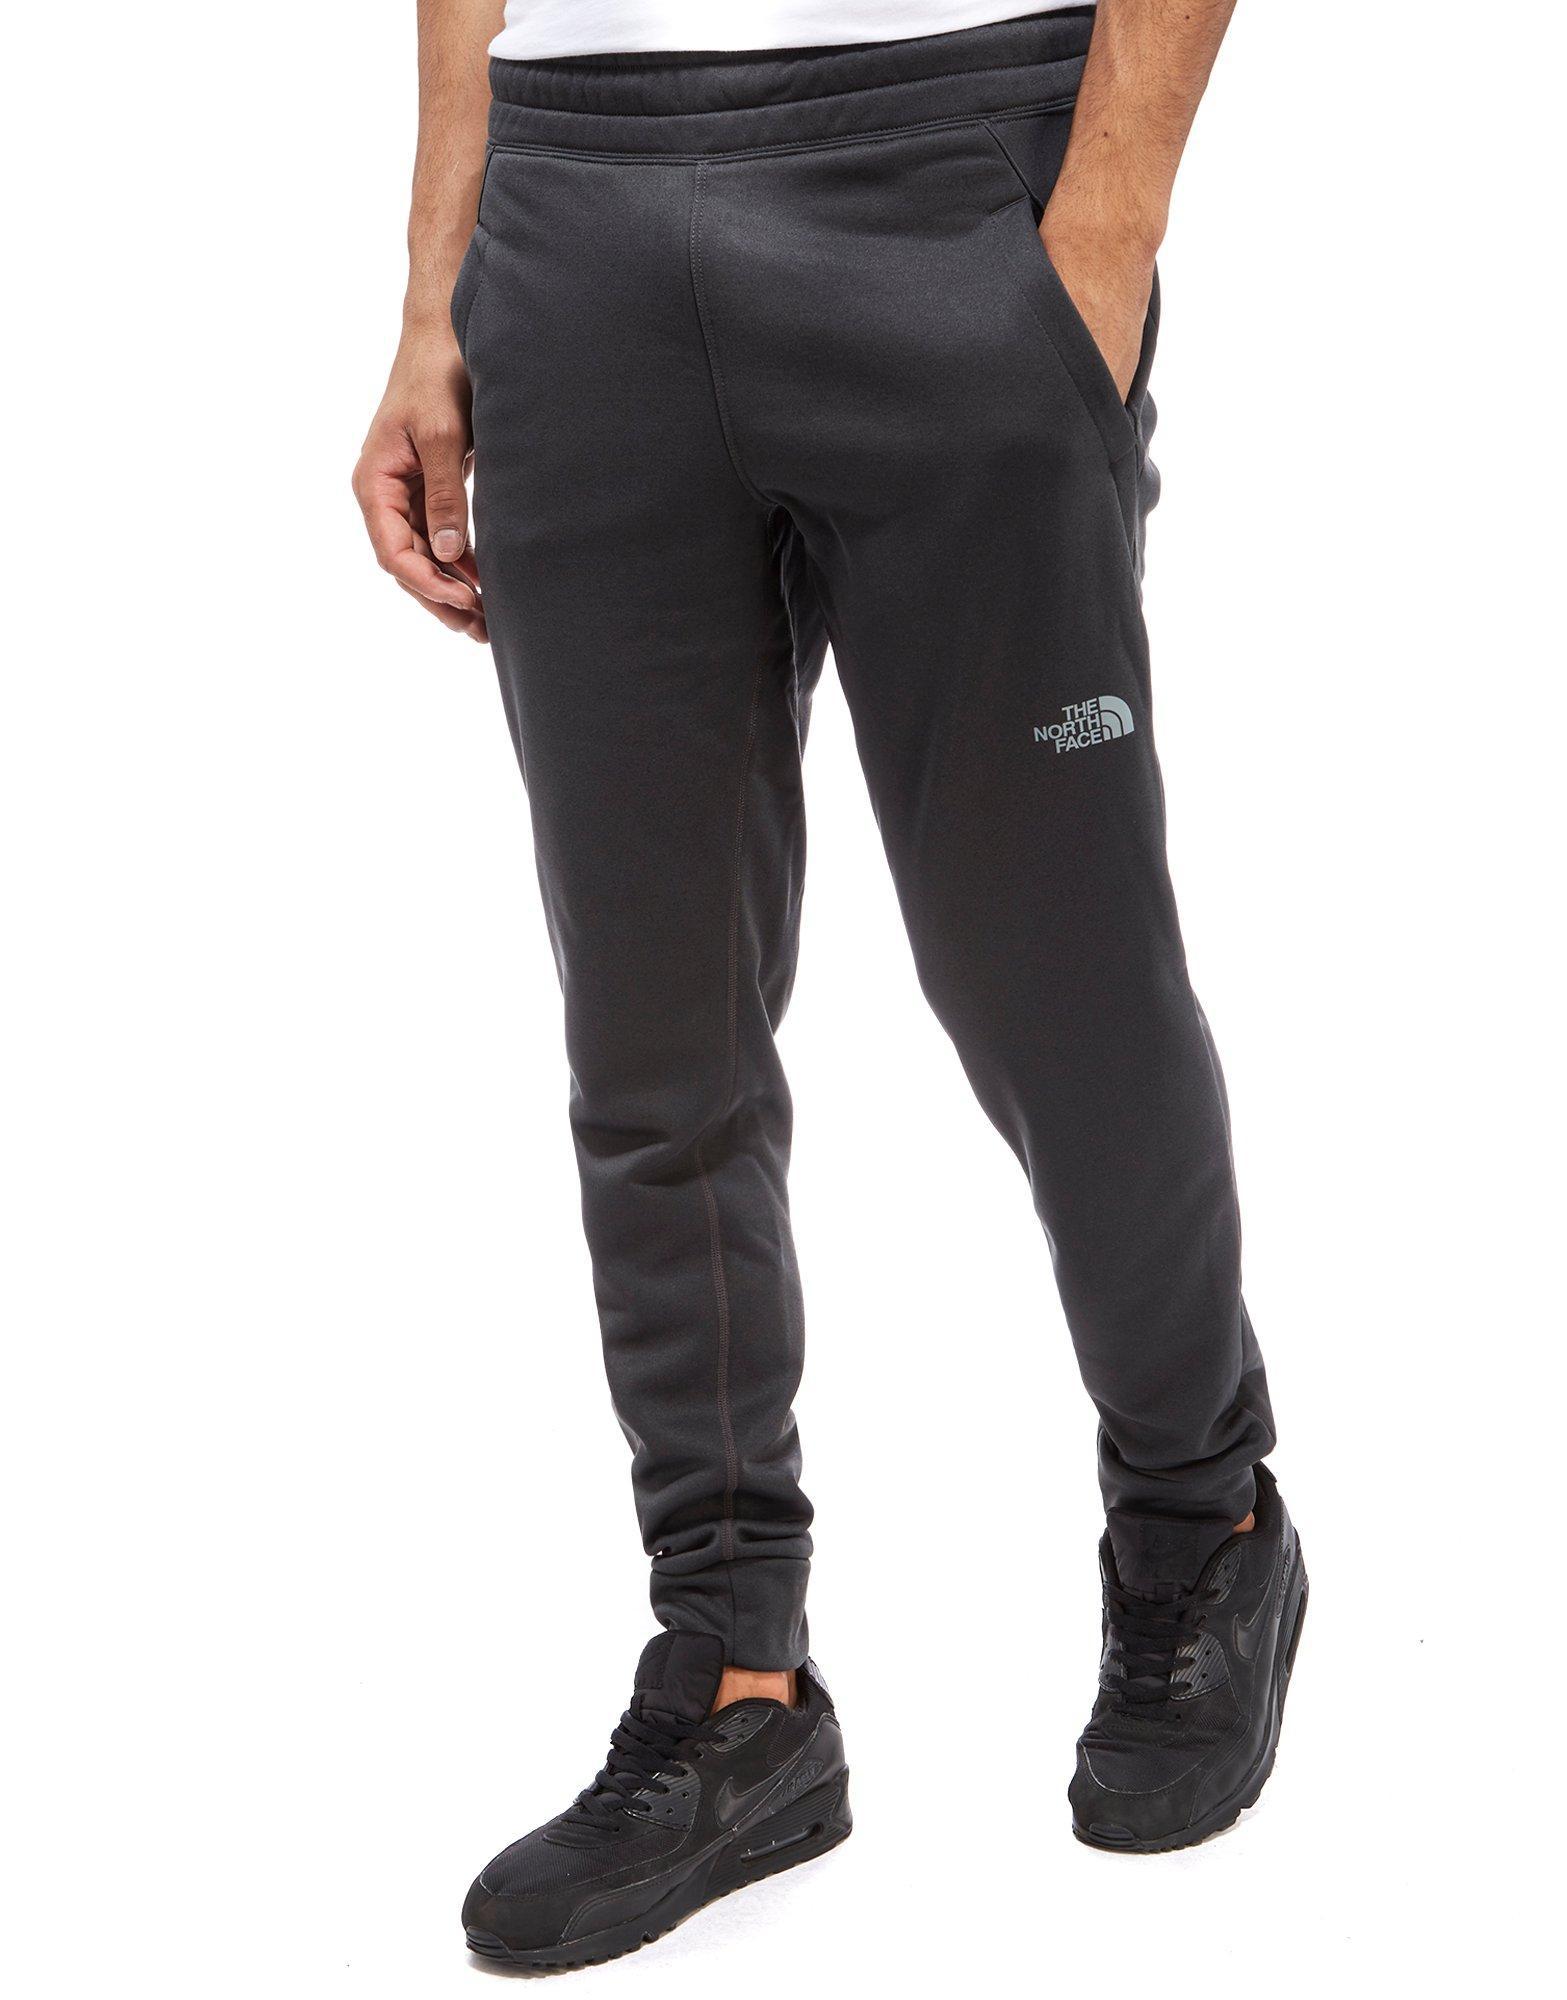 Lyst - The North Face Mittelegi Poly Track Pants in Gray for Men